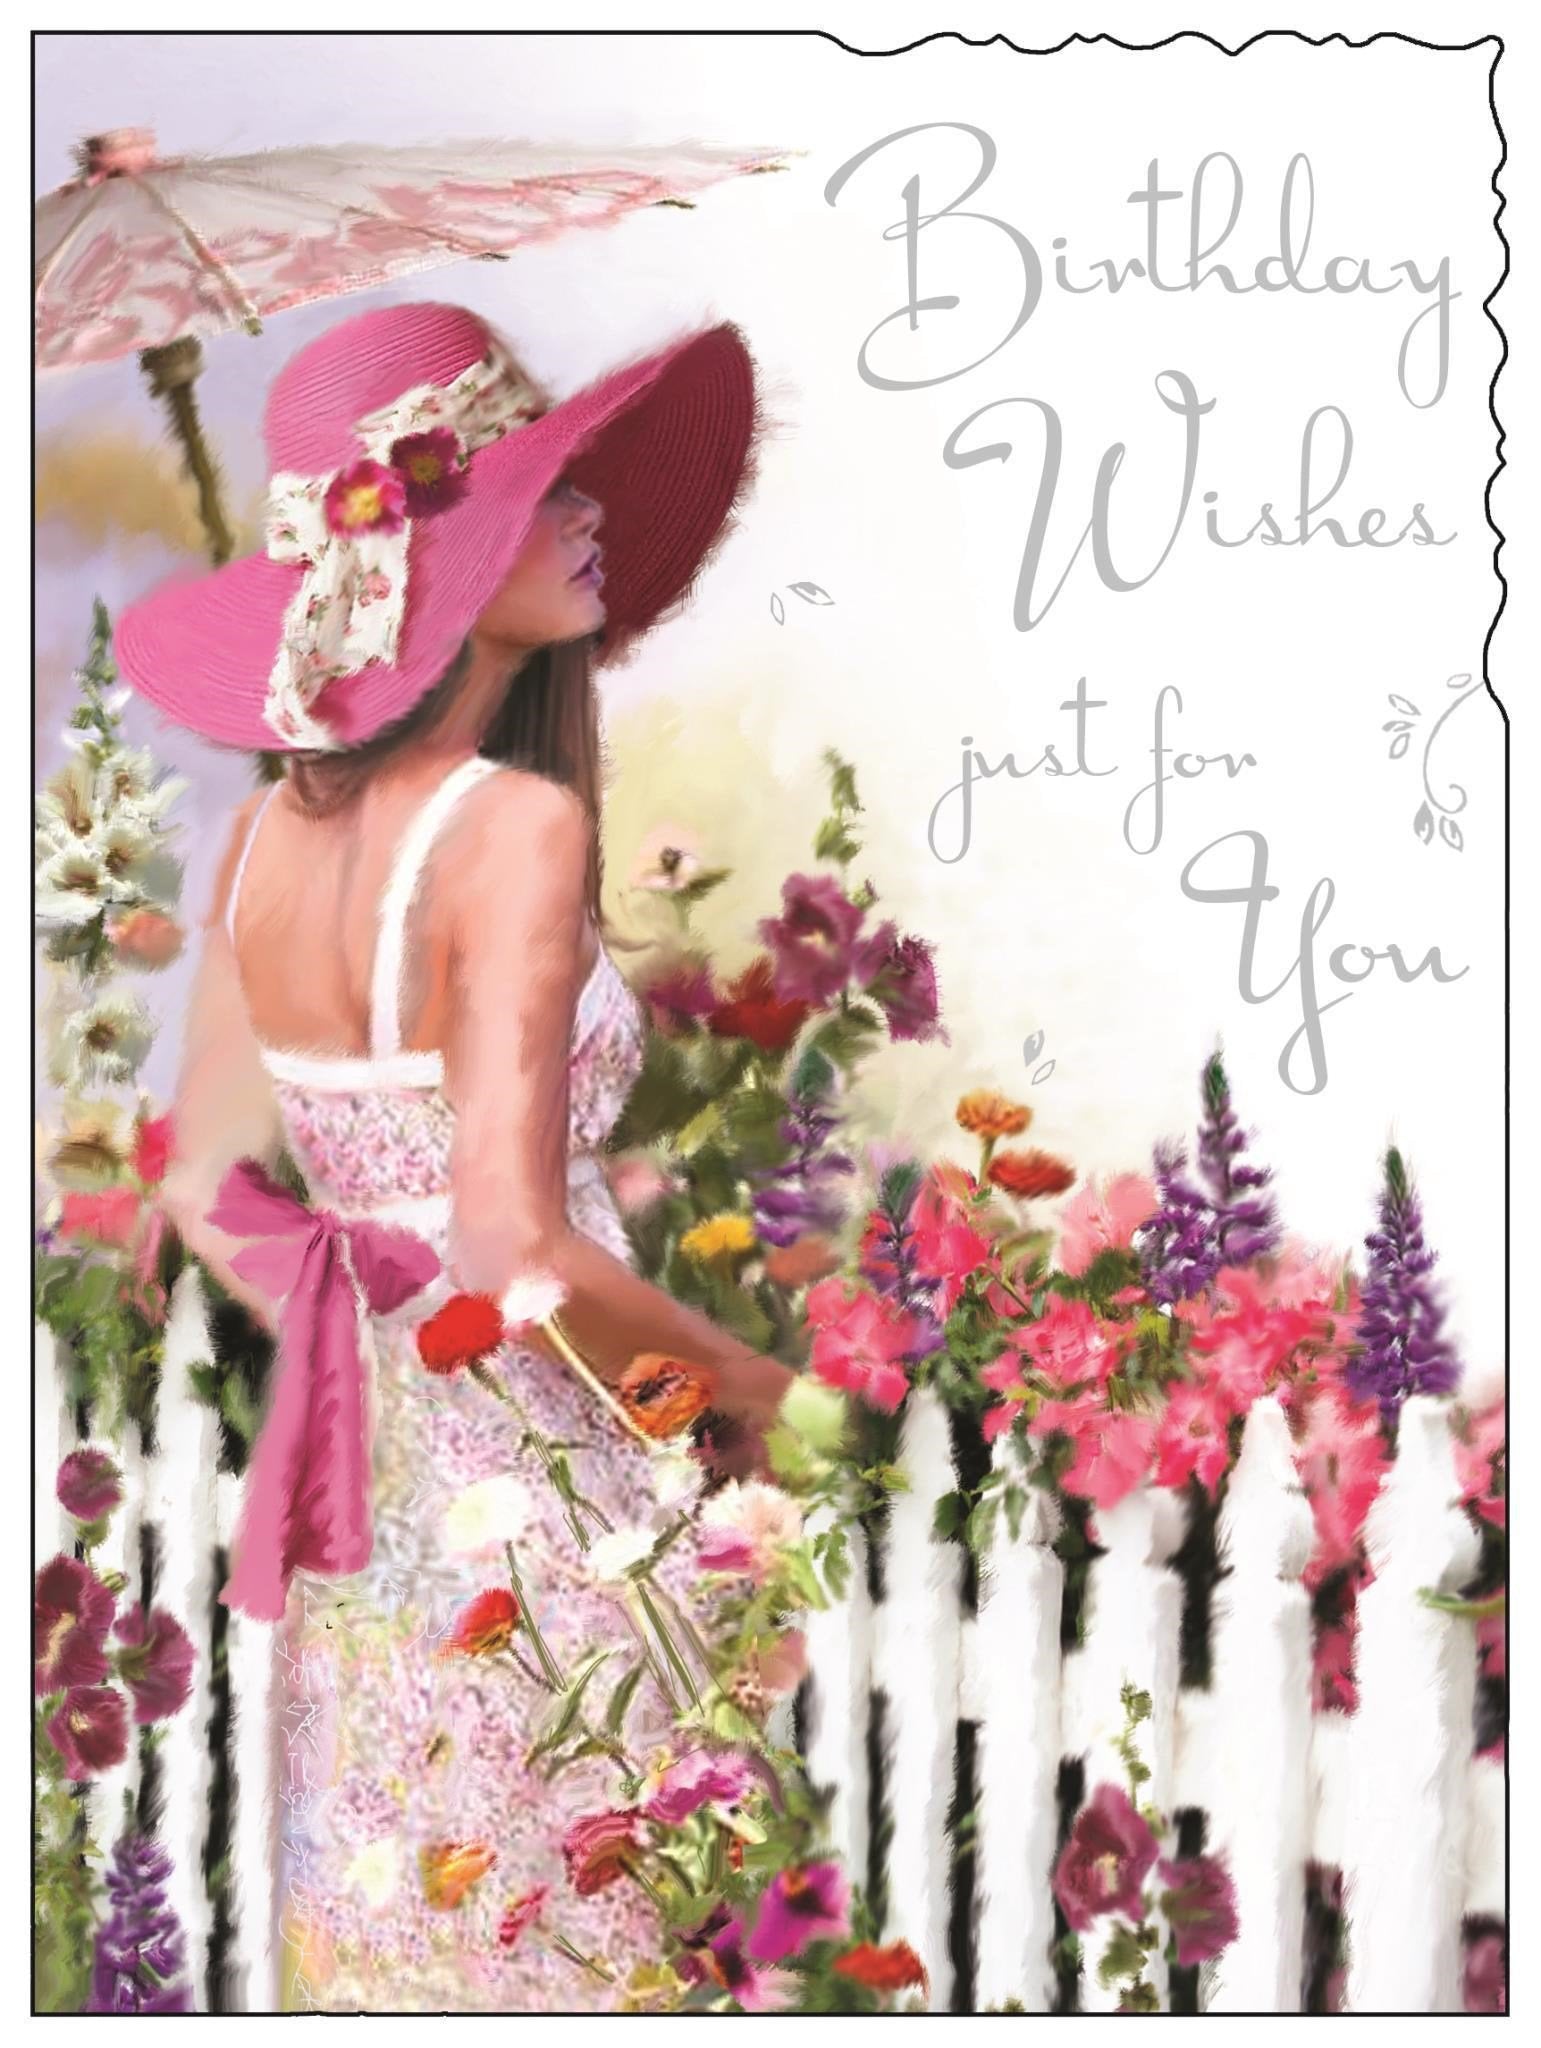 Front of Open Female Birthday Picket Fence Greetings Card